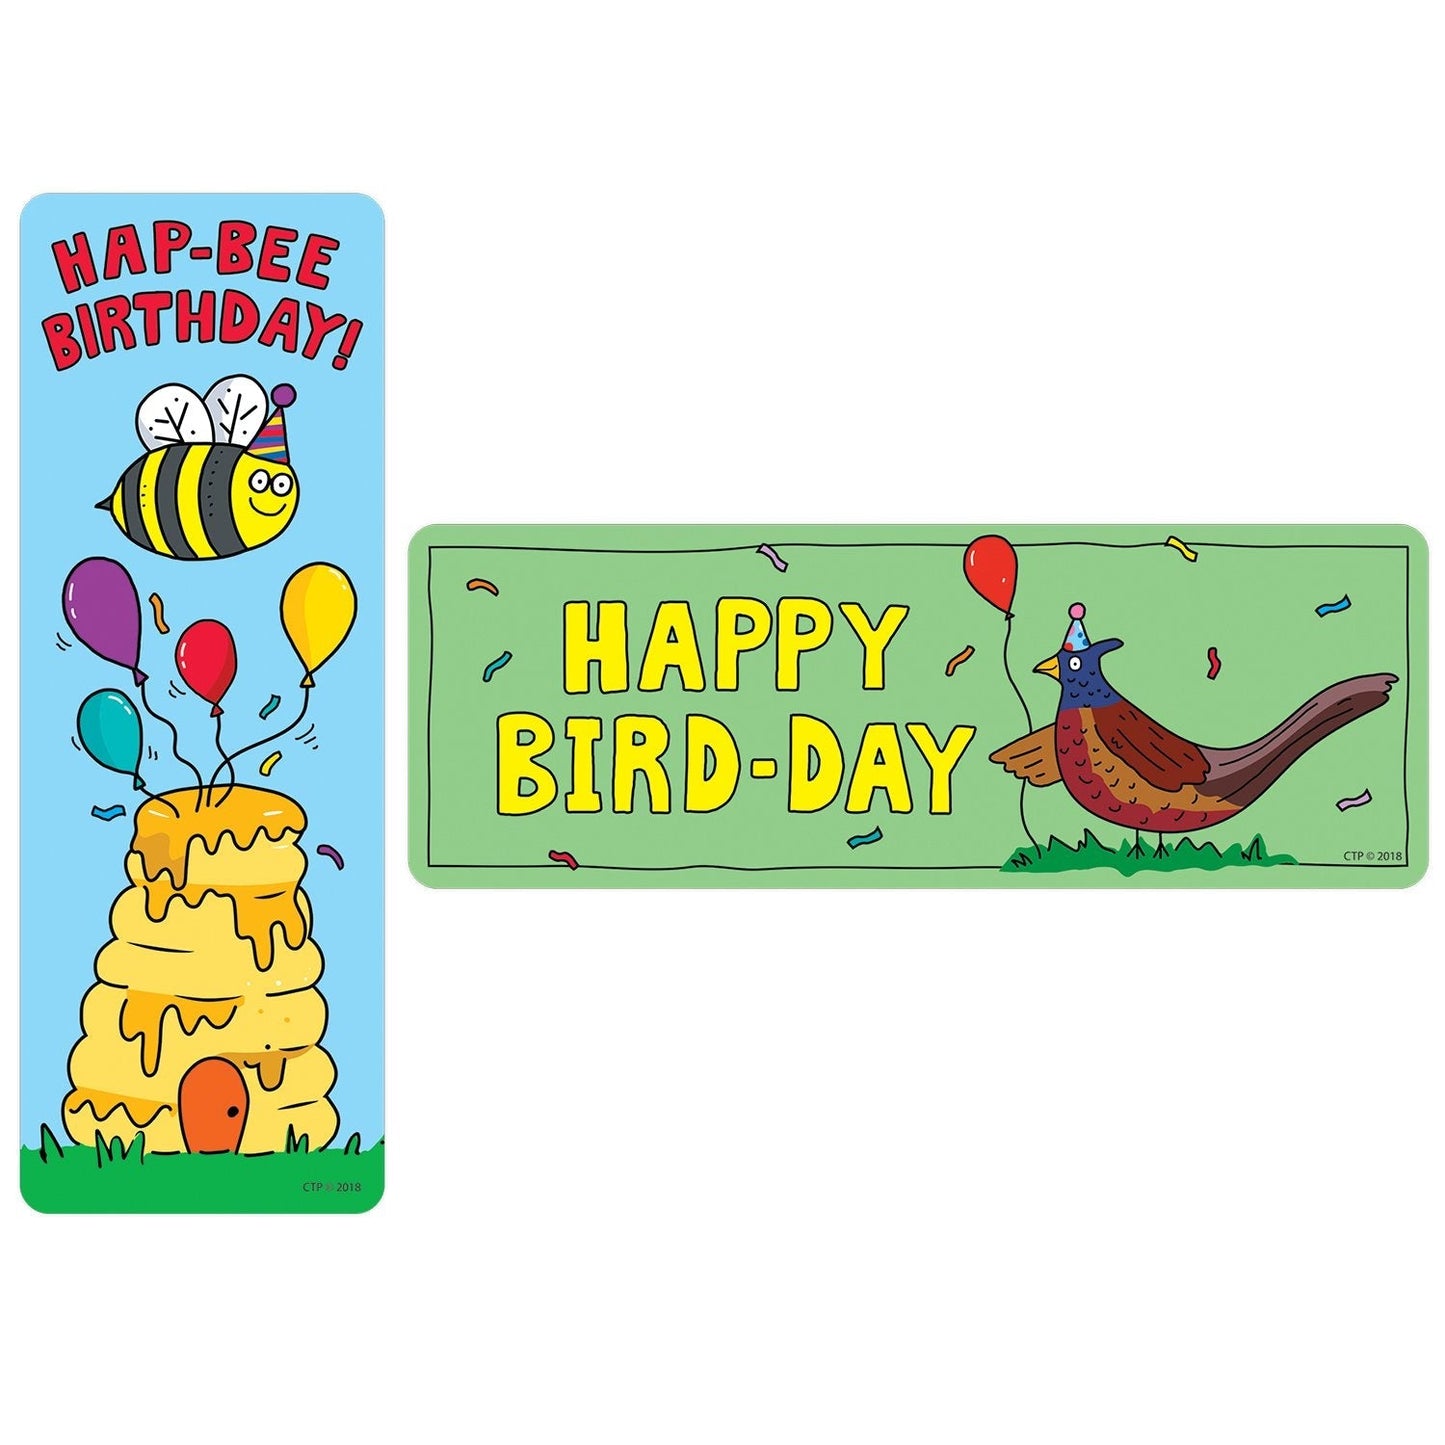 So Much Pun! Hap-bee Birthday Bookmarks